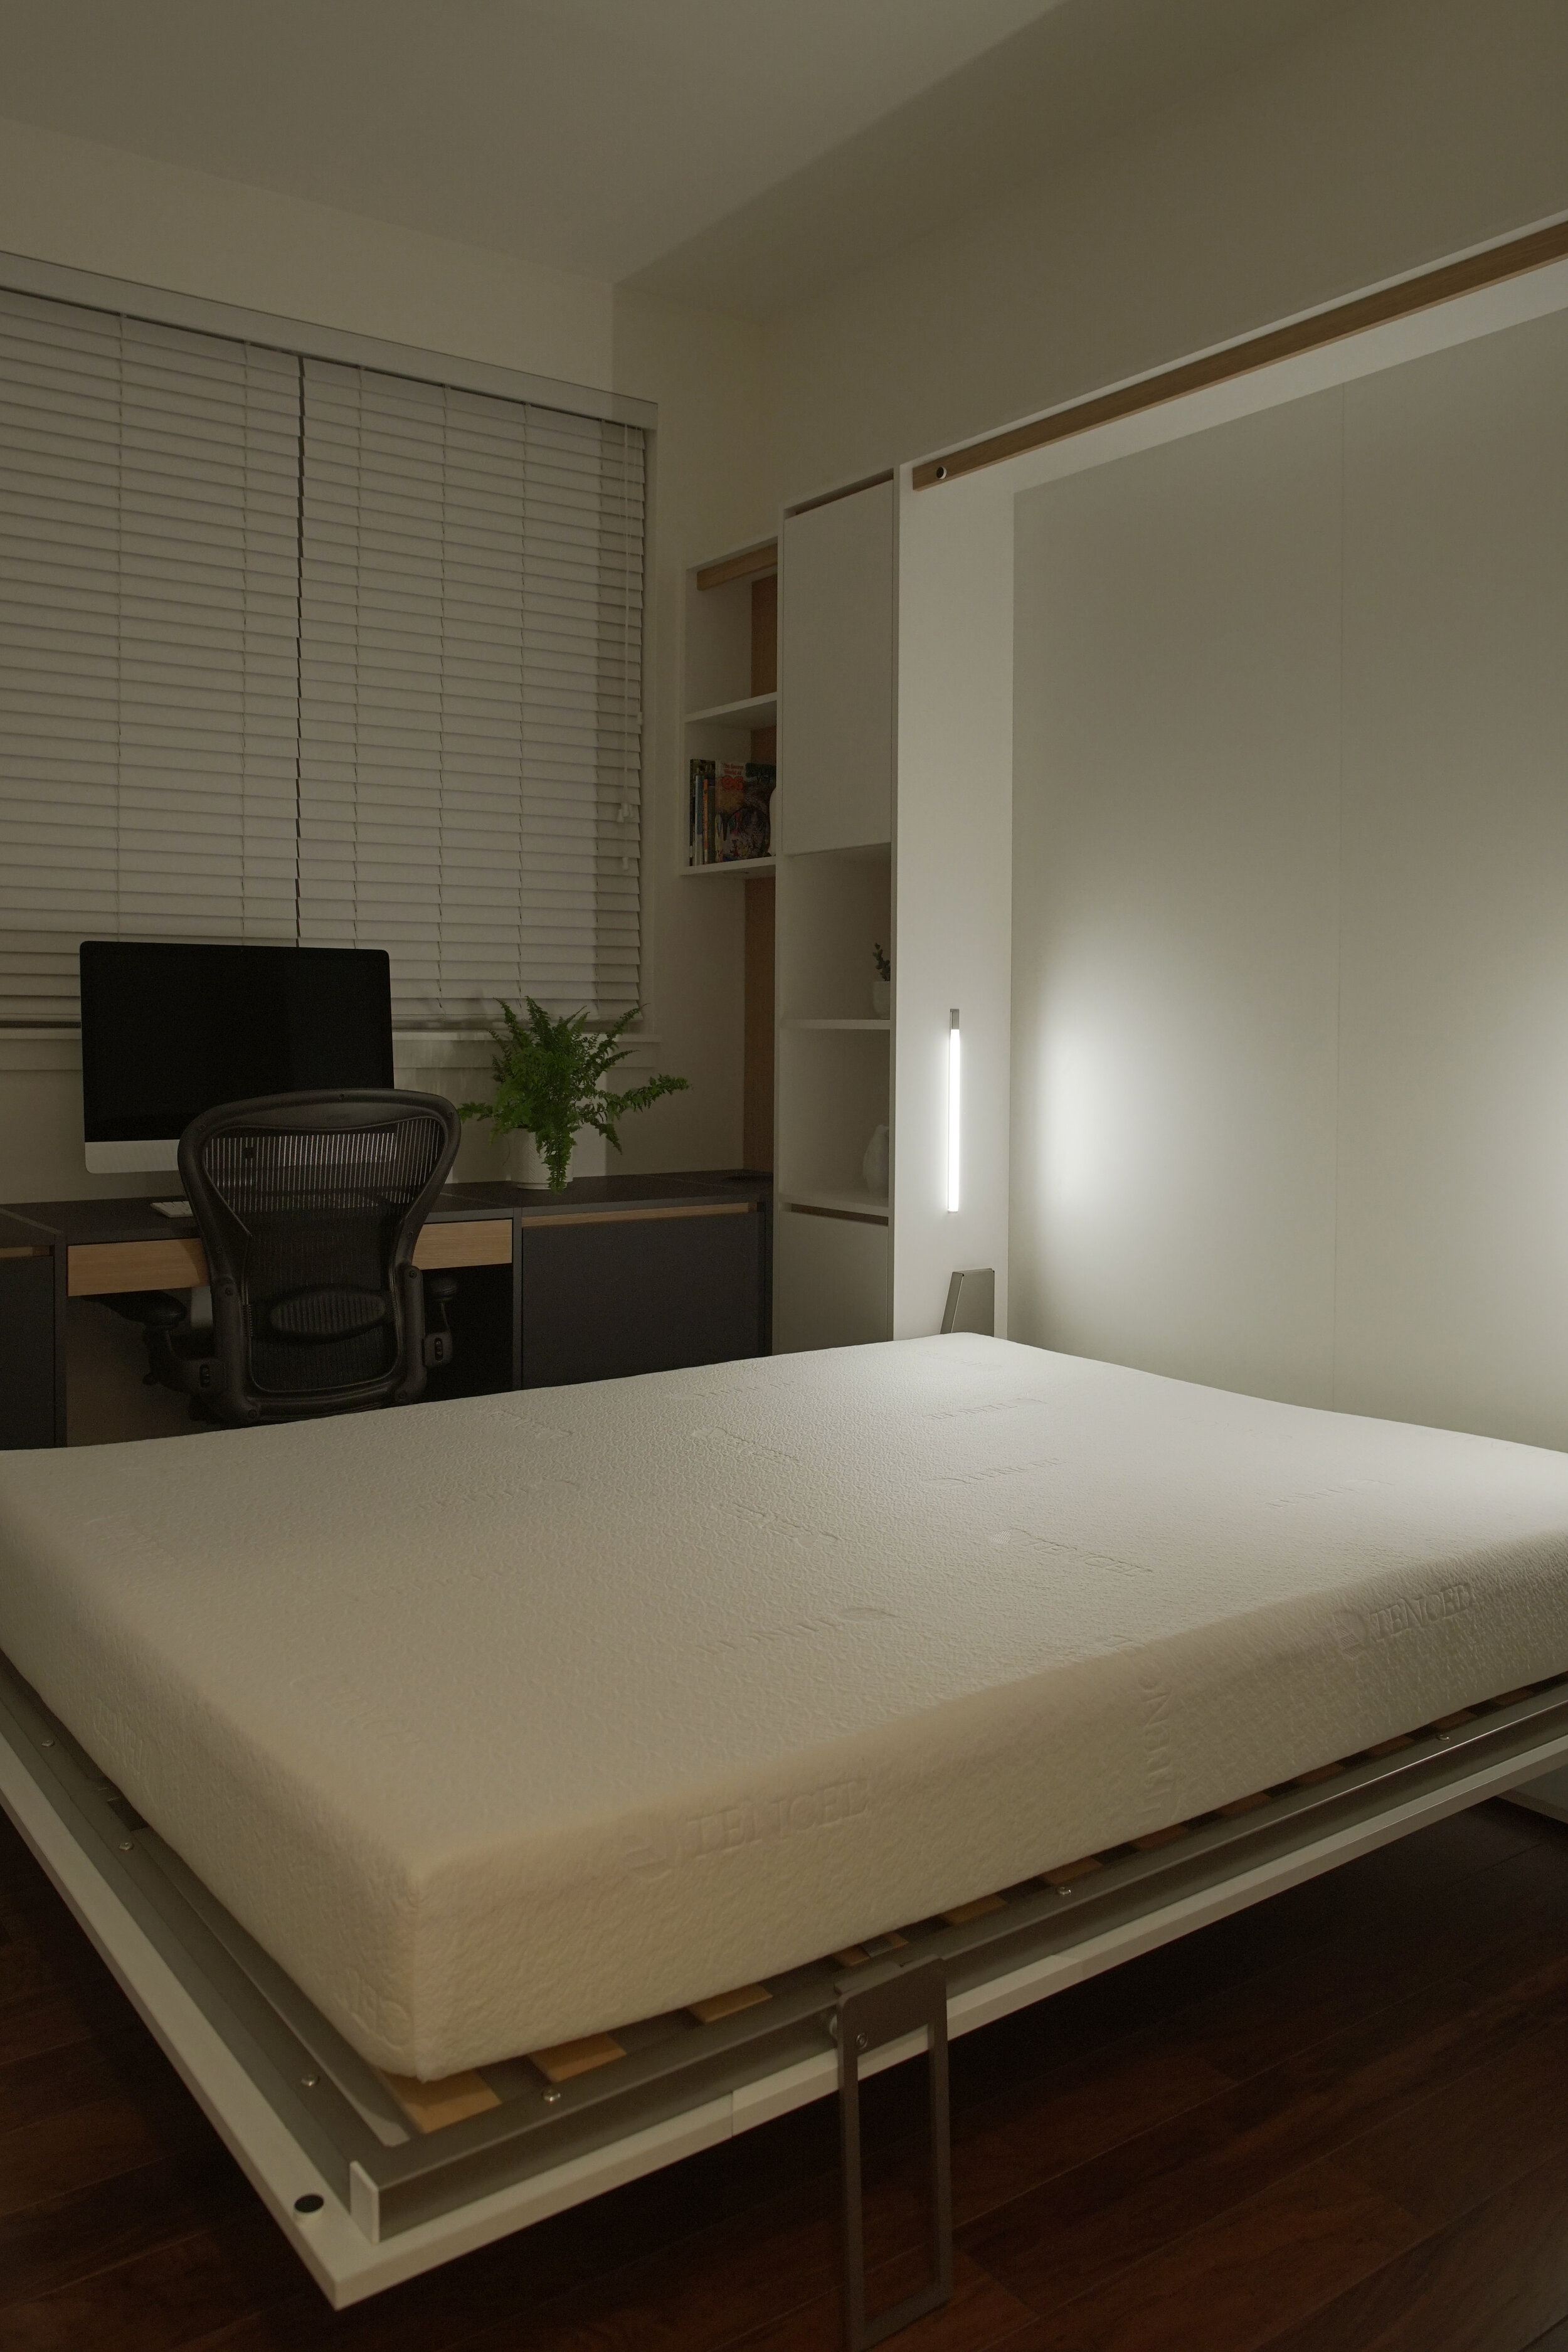 WallBed, Wall bed, muphy bed  Vancouver